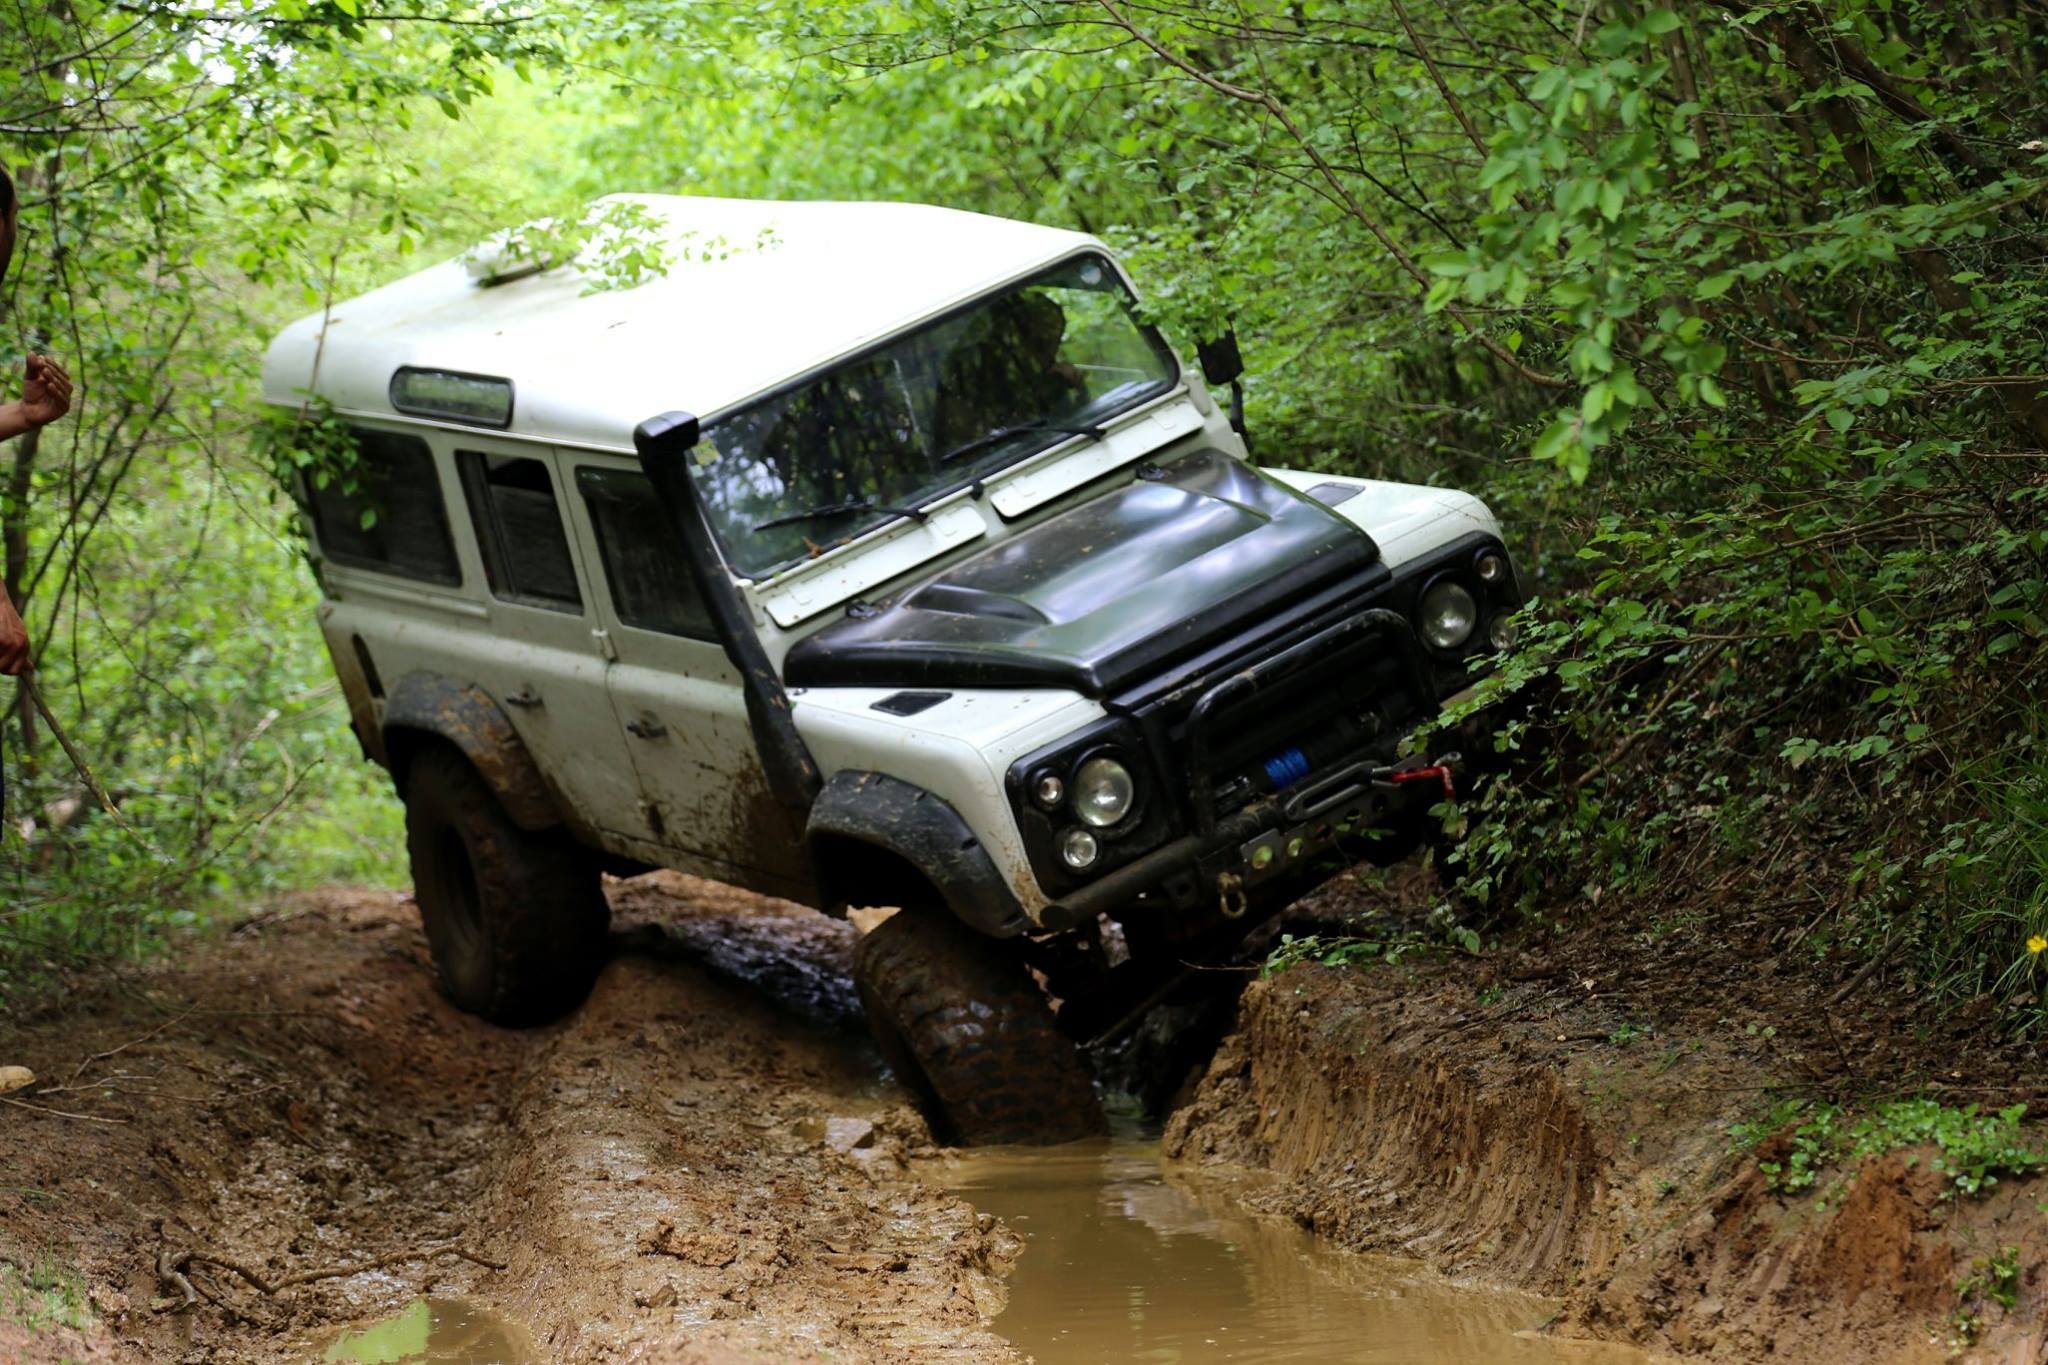 Extreme Offroad @Riva ***Defender TD5 & Discovery TD5 x3*** - YouTube